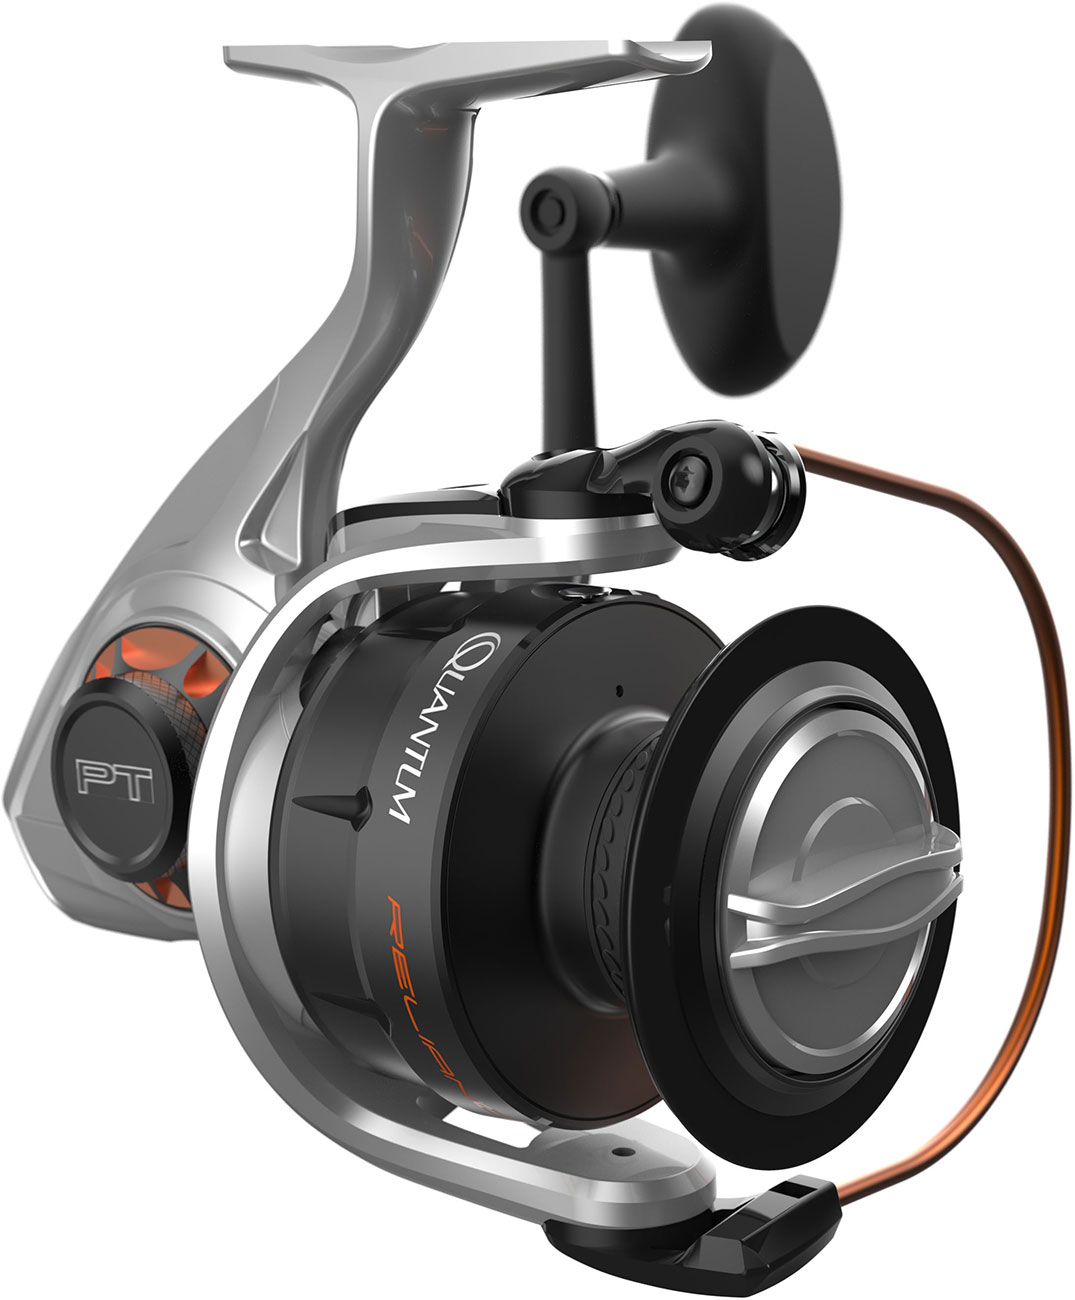 Quantum Reliance PT XPT Spinning Reel